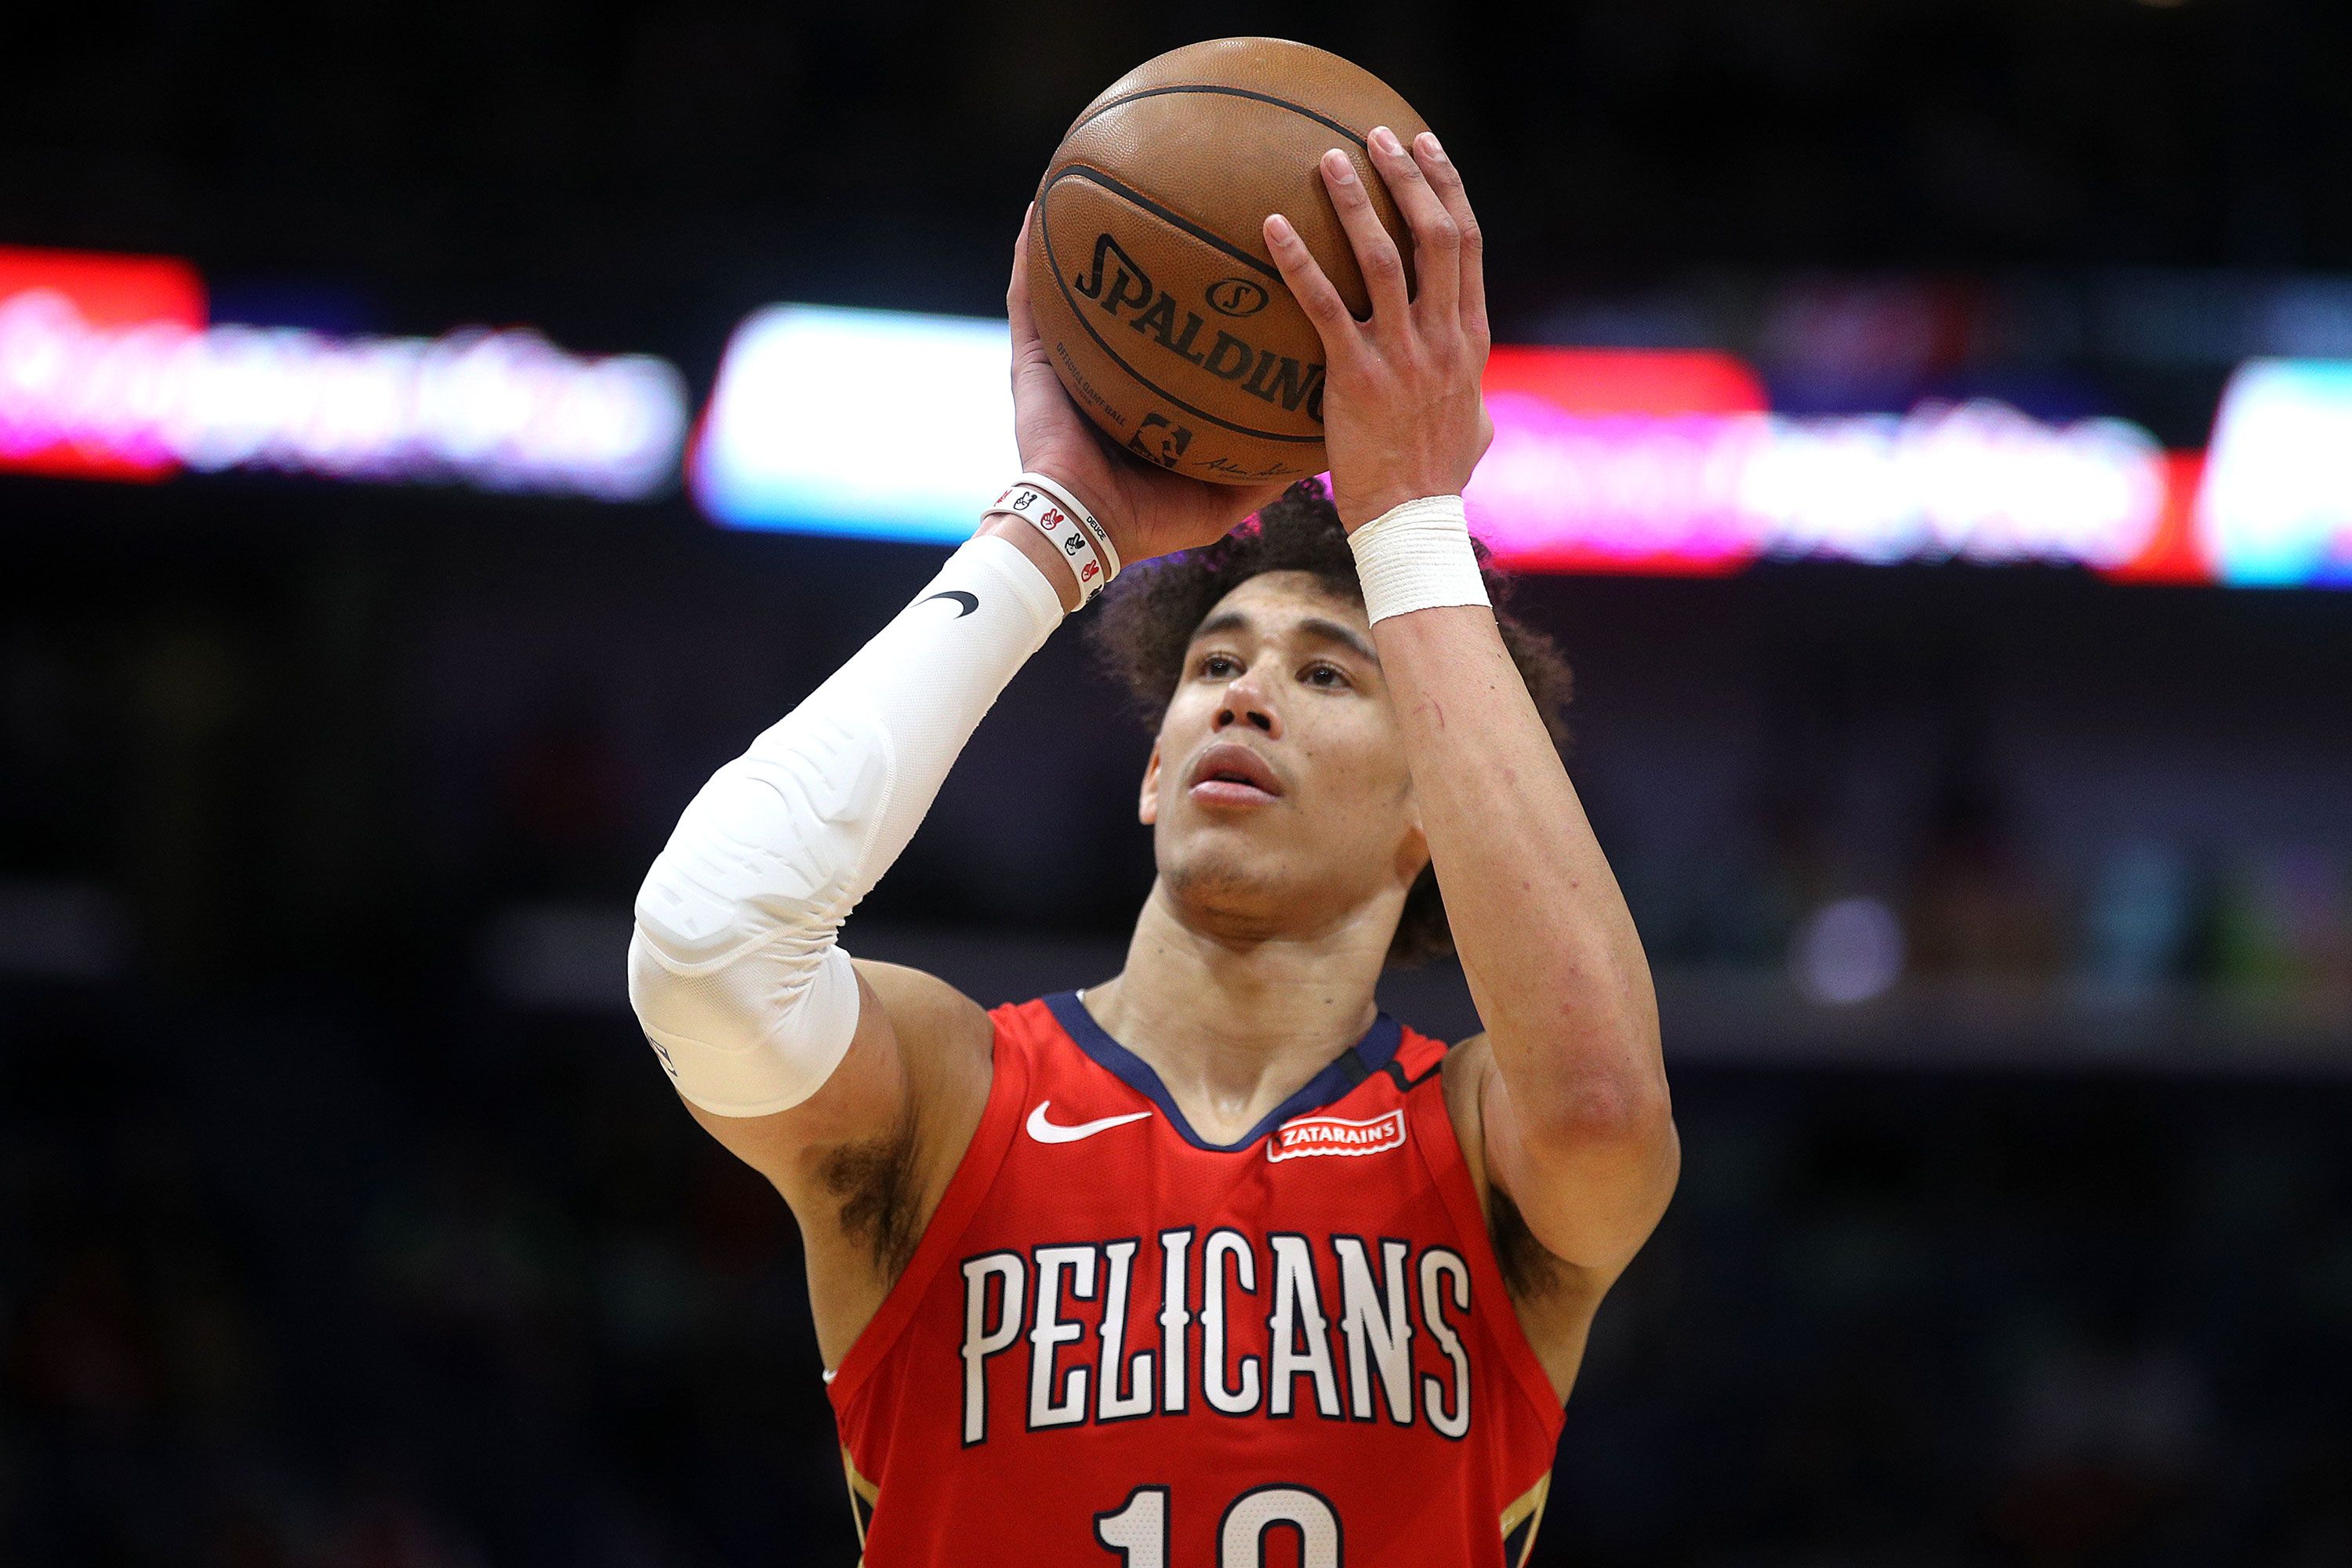 Pelicans' Jaxson Hayes issues apology for expletive-filled rant